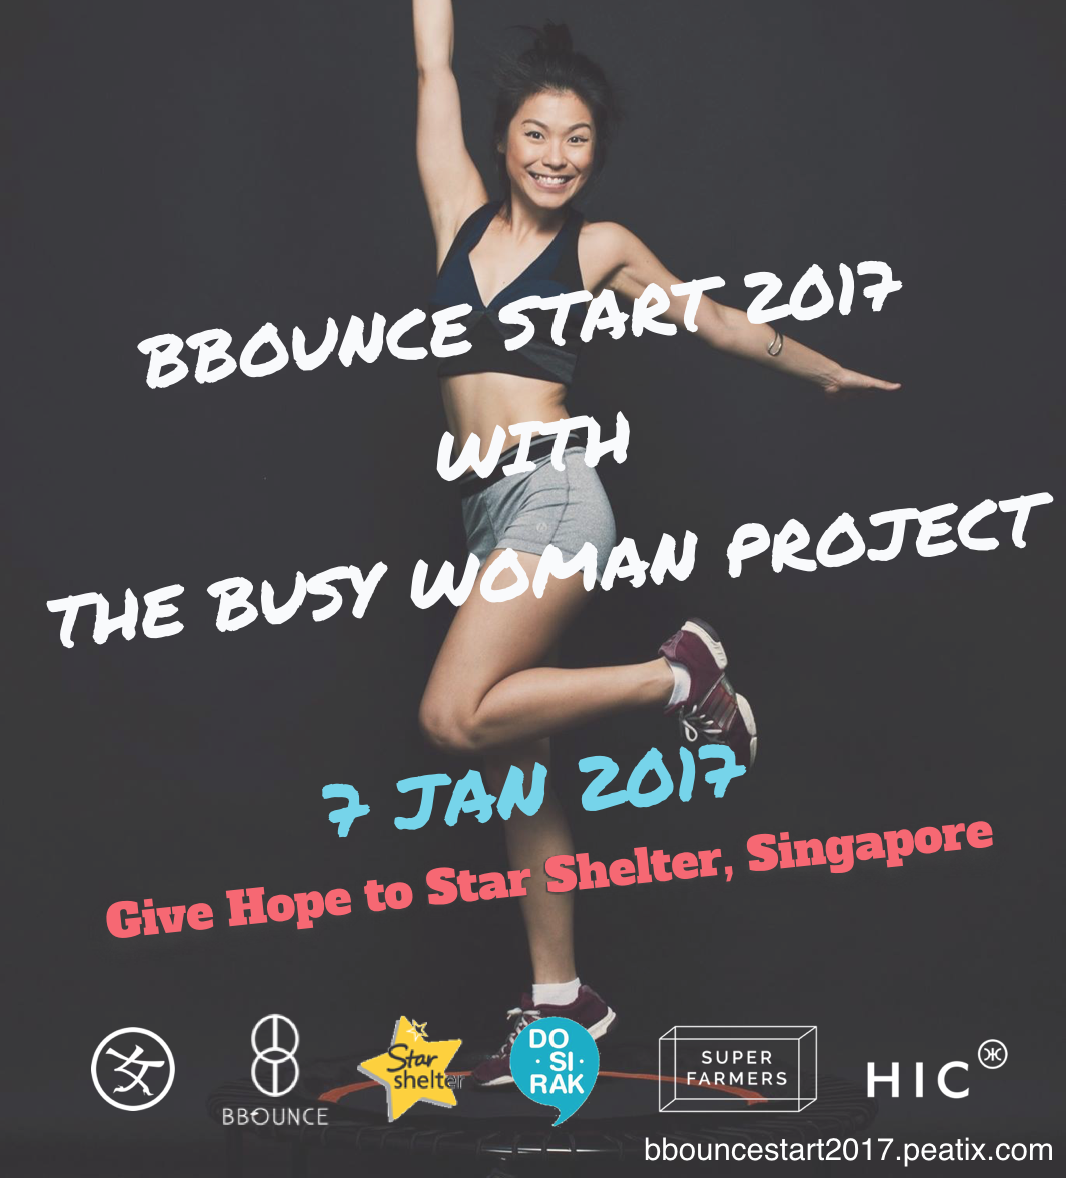 [Event] BBOUNCE Start 2017 with The Busy Woman Project